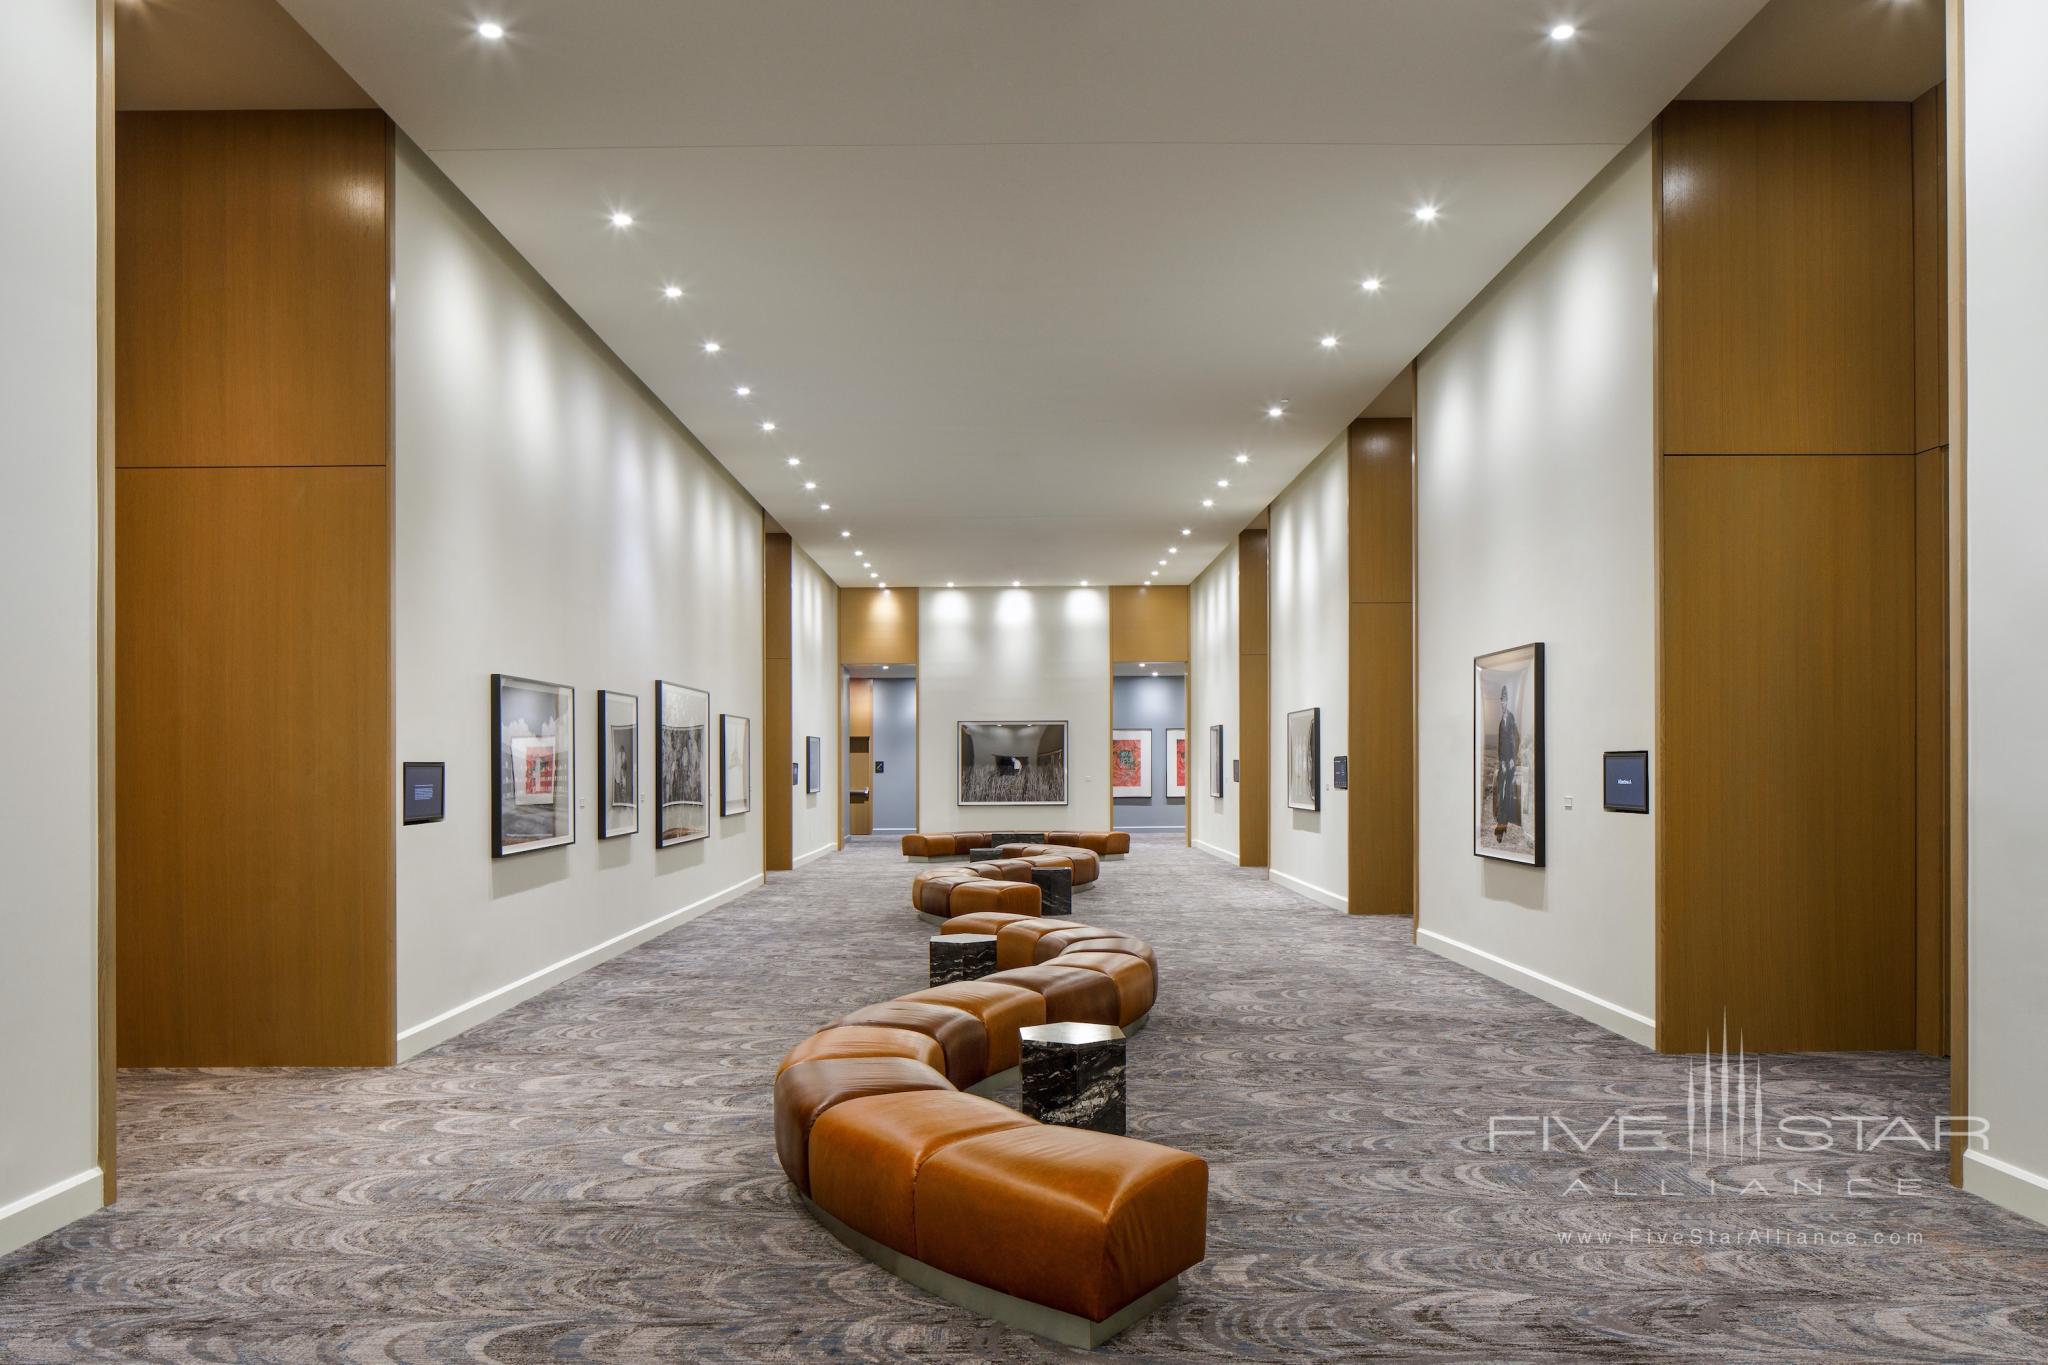 The Joseph Hotel Nashville Gallery — features more than 1,100 works of art from the acclaimed Pizzuti Collection, one of the top contemporary art collections in the world. The 8th floor gallery connects event space and showcases a rotating display of artists.